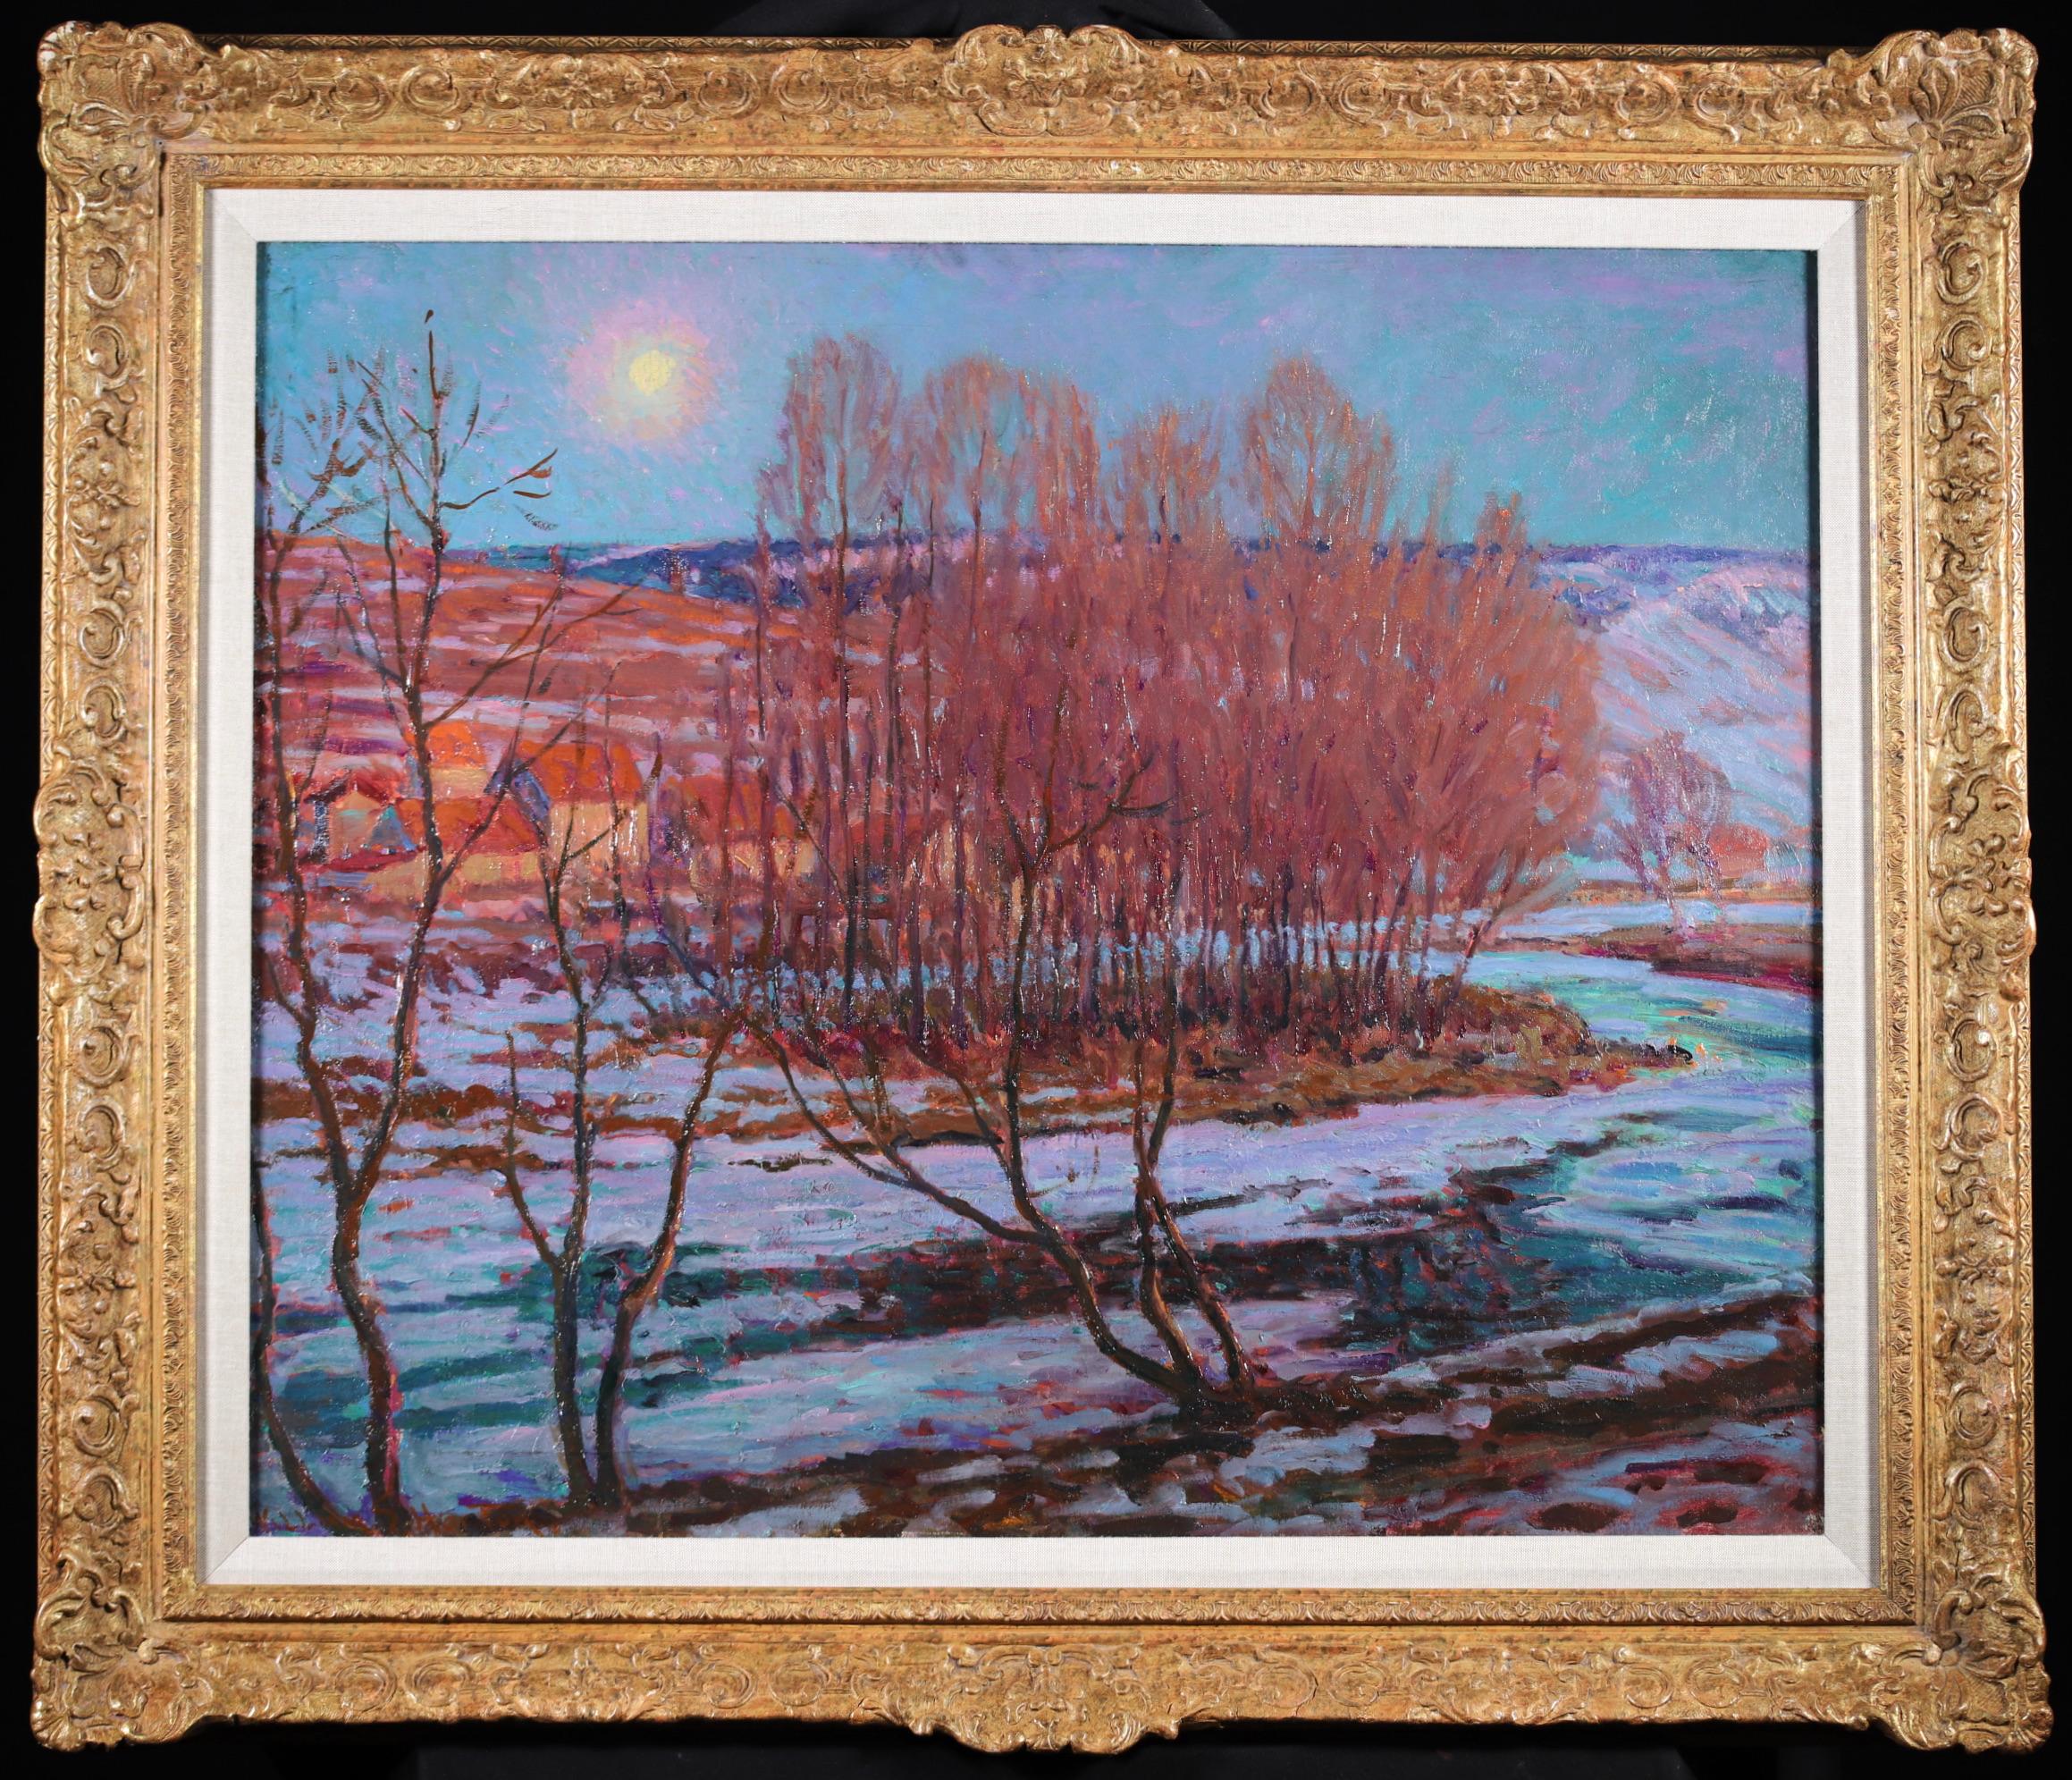 Signed oil on canvas landscape by American impressionist painter William Samuel Horton. The piece depicts a nighttime view of Pontarlier, a commune in eastern France near the Swiss border. The town's buildings are illuminated by the moonlight and